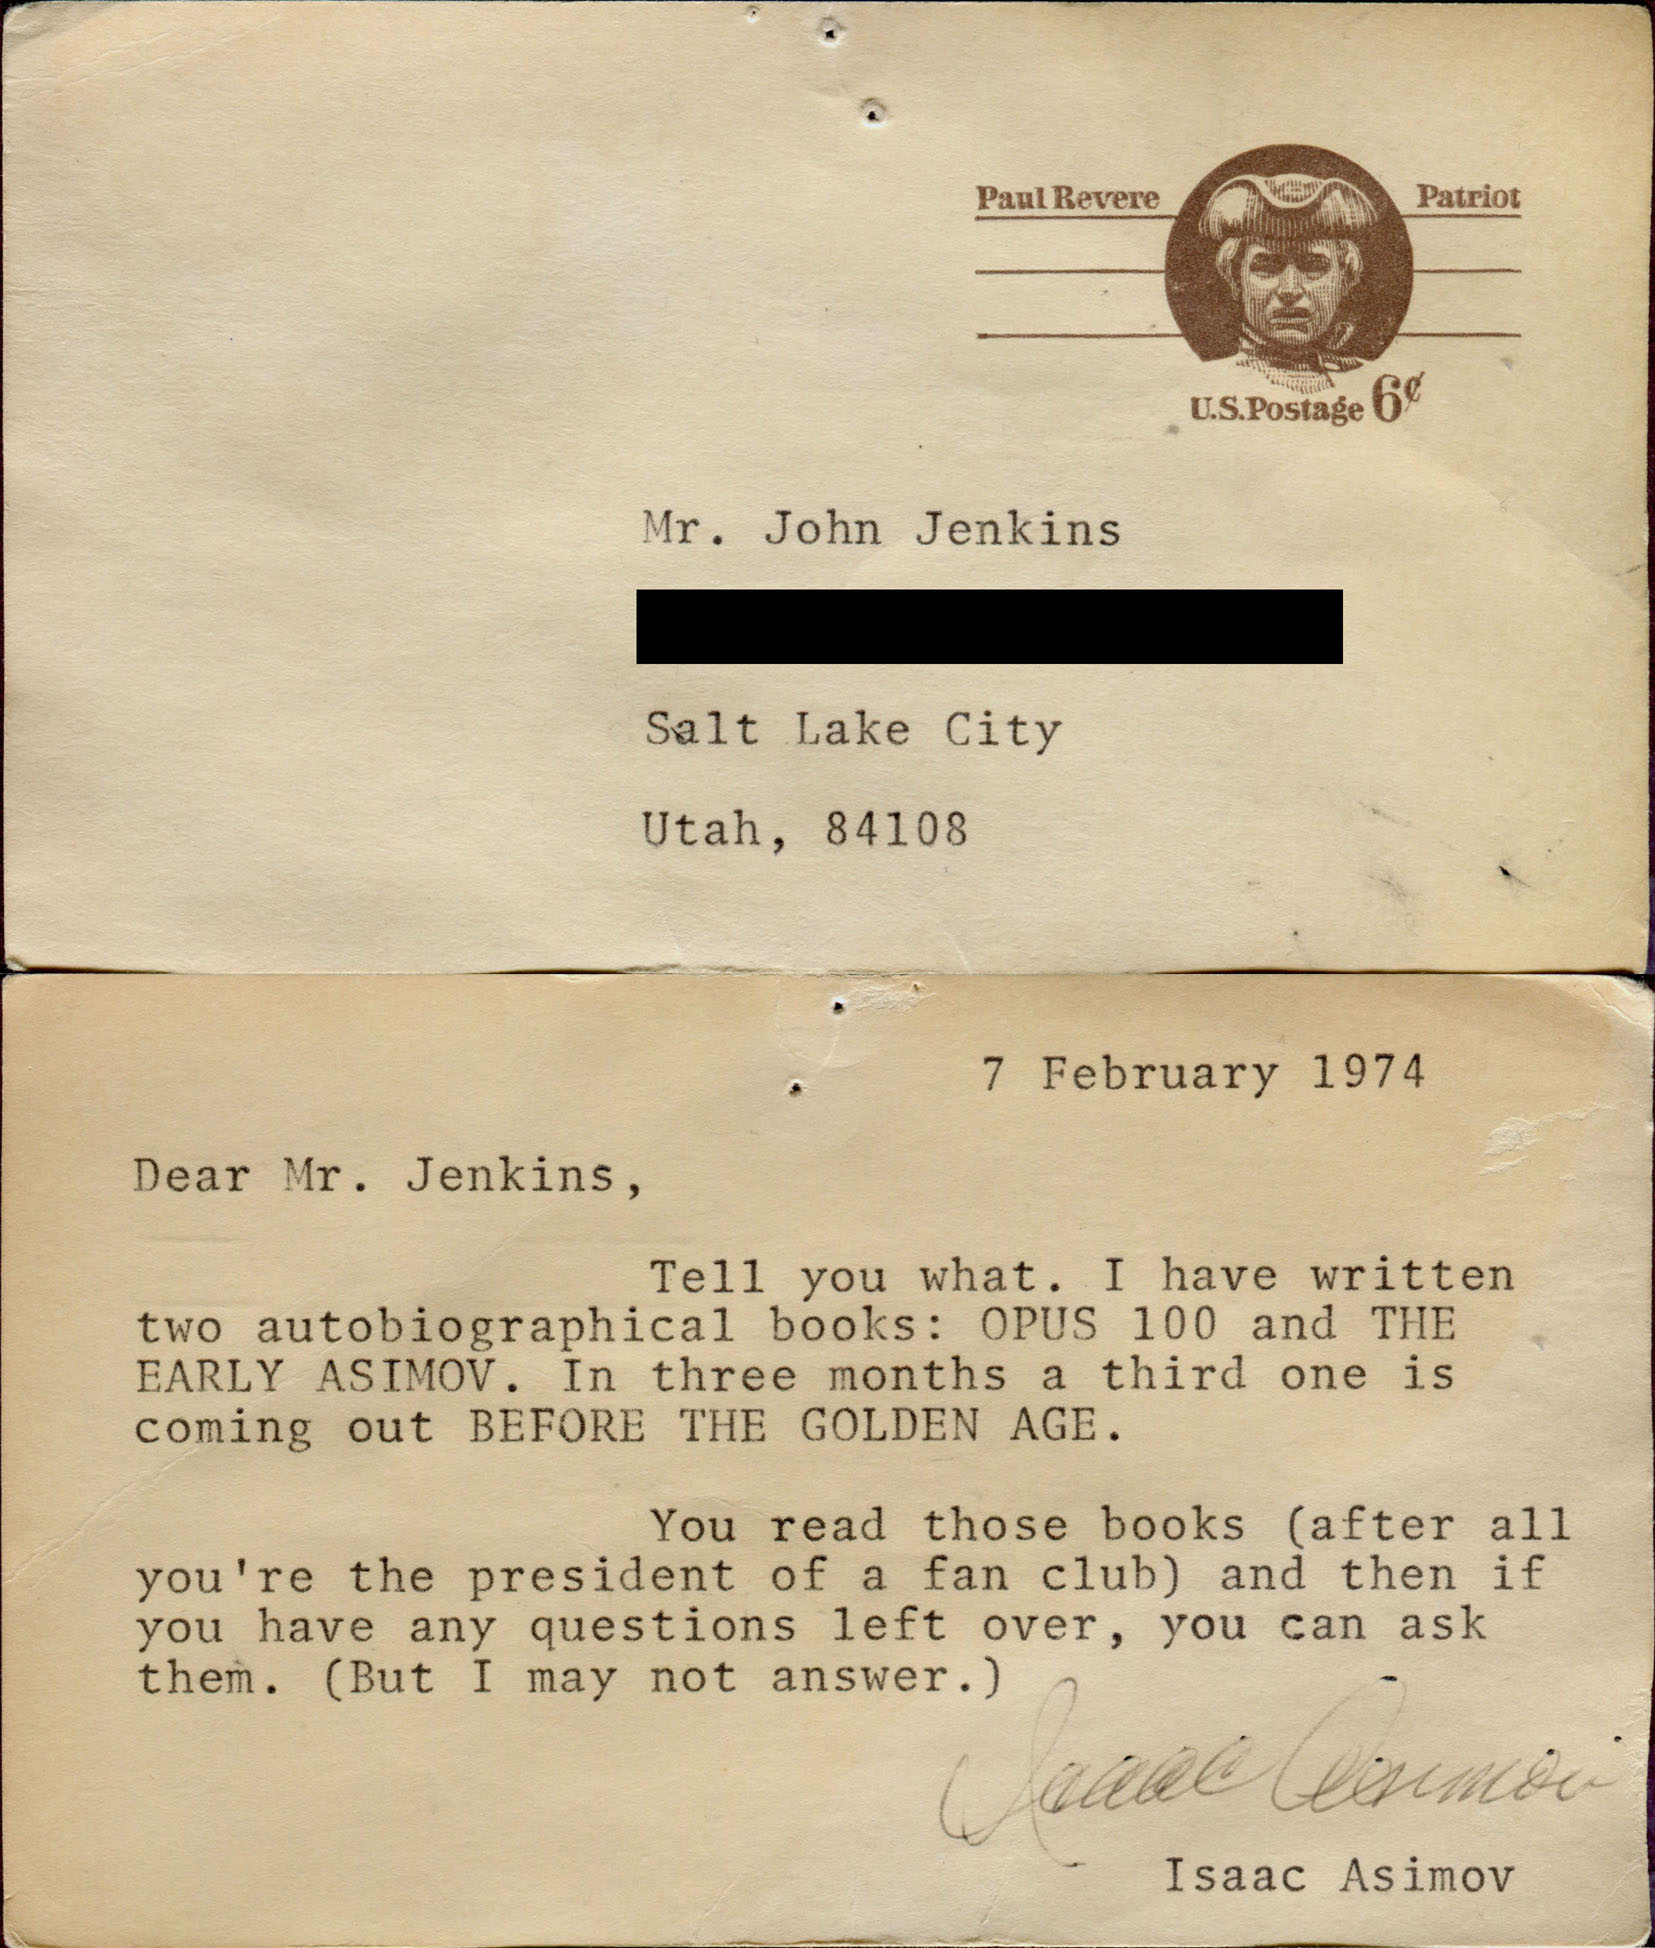 7 February 1974. Dear Mr. Jenkins, Tell you what. I have written two autobiographical books: OPUS 100 and THE EARLY ASIMOV. In three months a third one is coming out BEFORE THE GOLDEN AGE. You read those books (after all you're the president of a fan club) and then if you have any questions left over, you can ask them. (But I may not answer.) Isaac Asimov